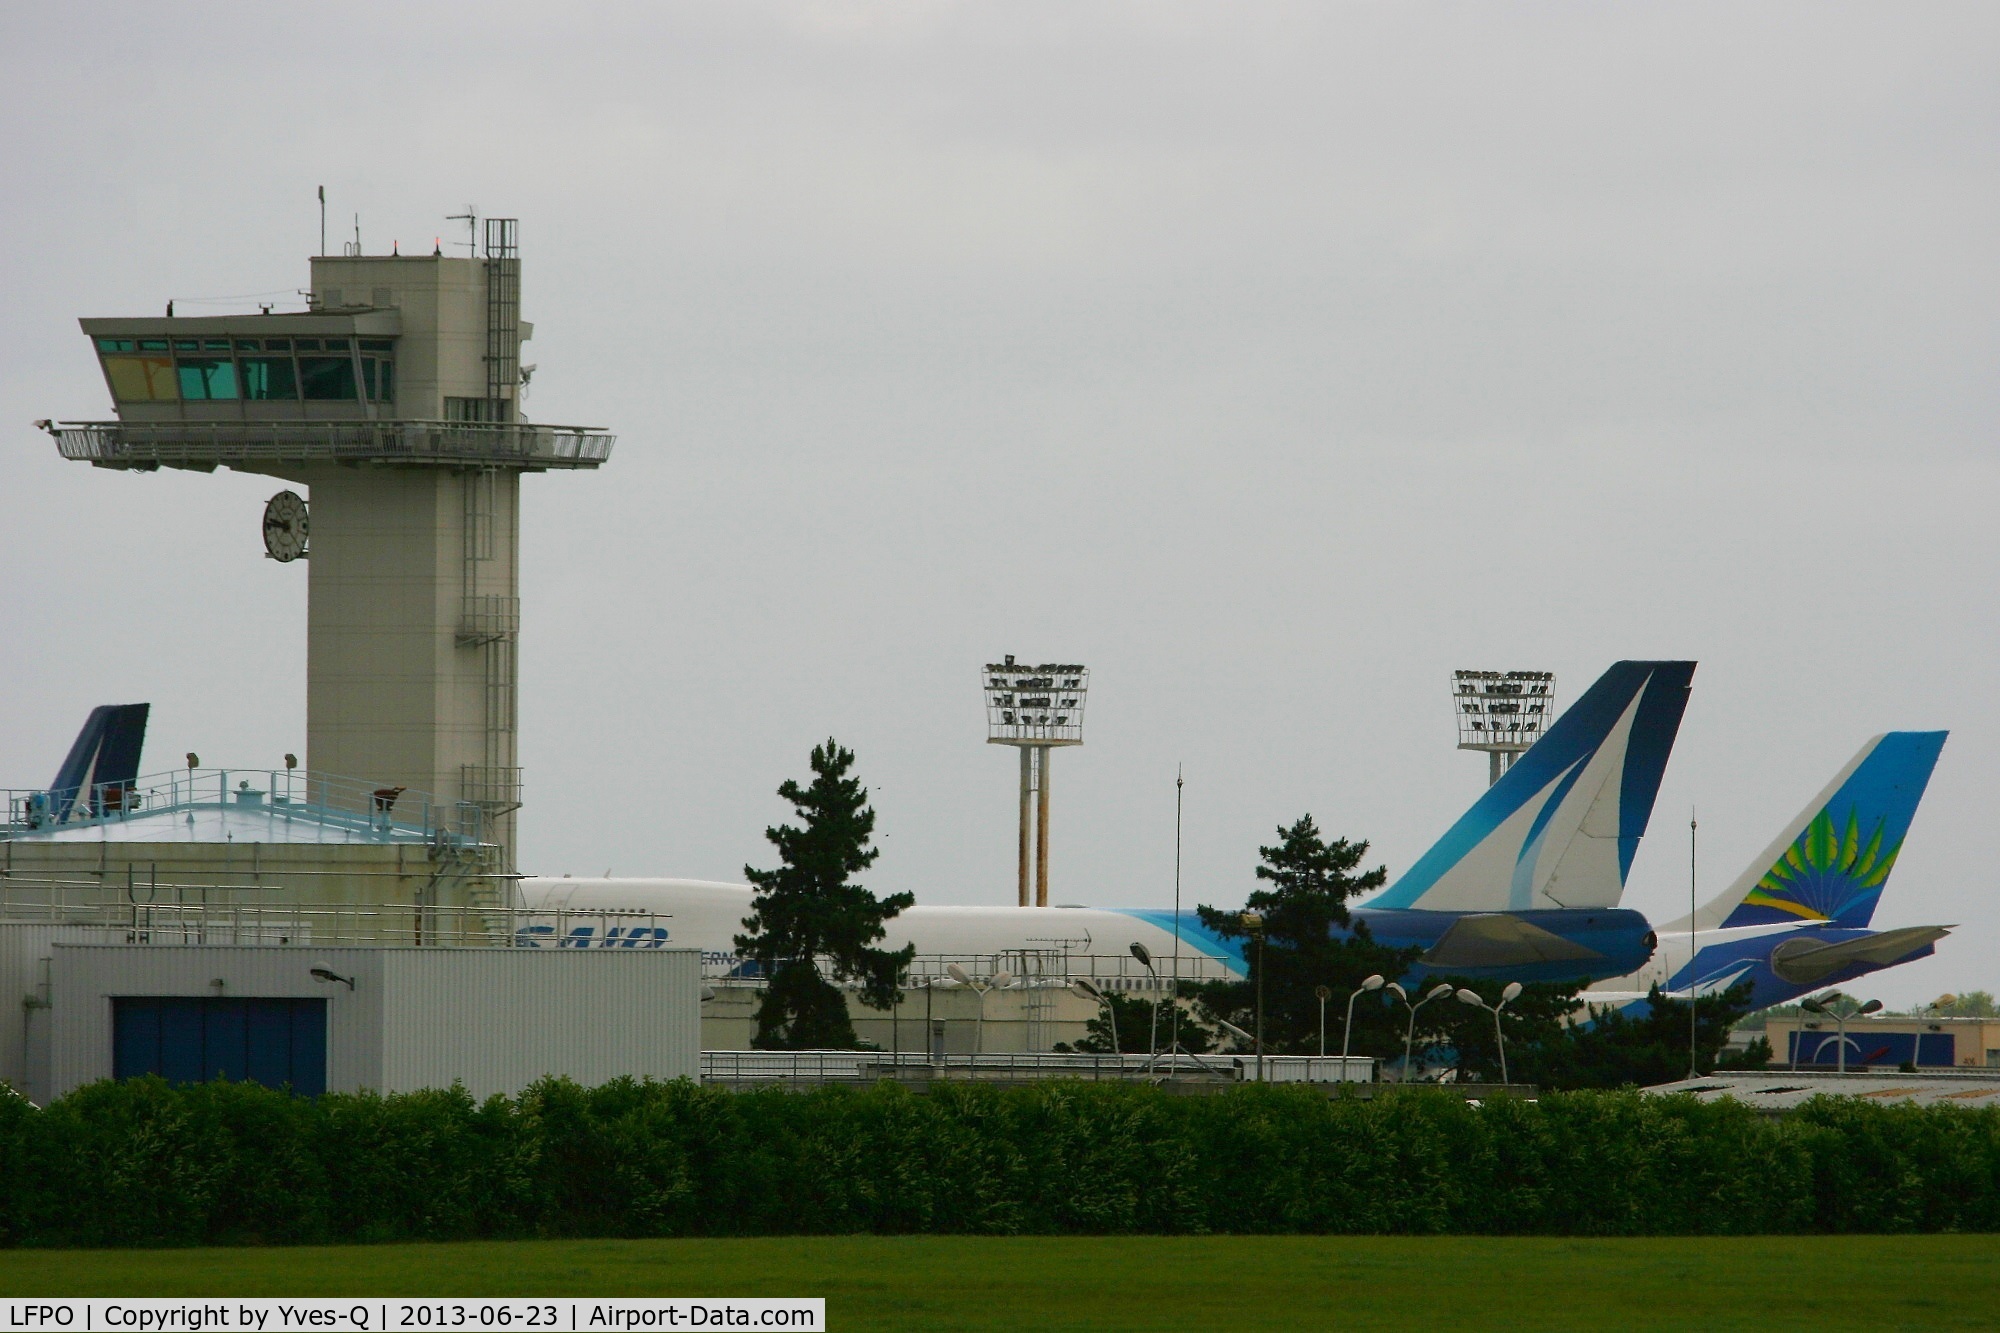 Paris Orly Airport, Orly (near Paris) France (LFPO) - Taxiing Area Contol Tower, Paris-Orly Airport (LFPO-ORY)